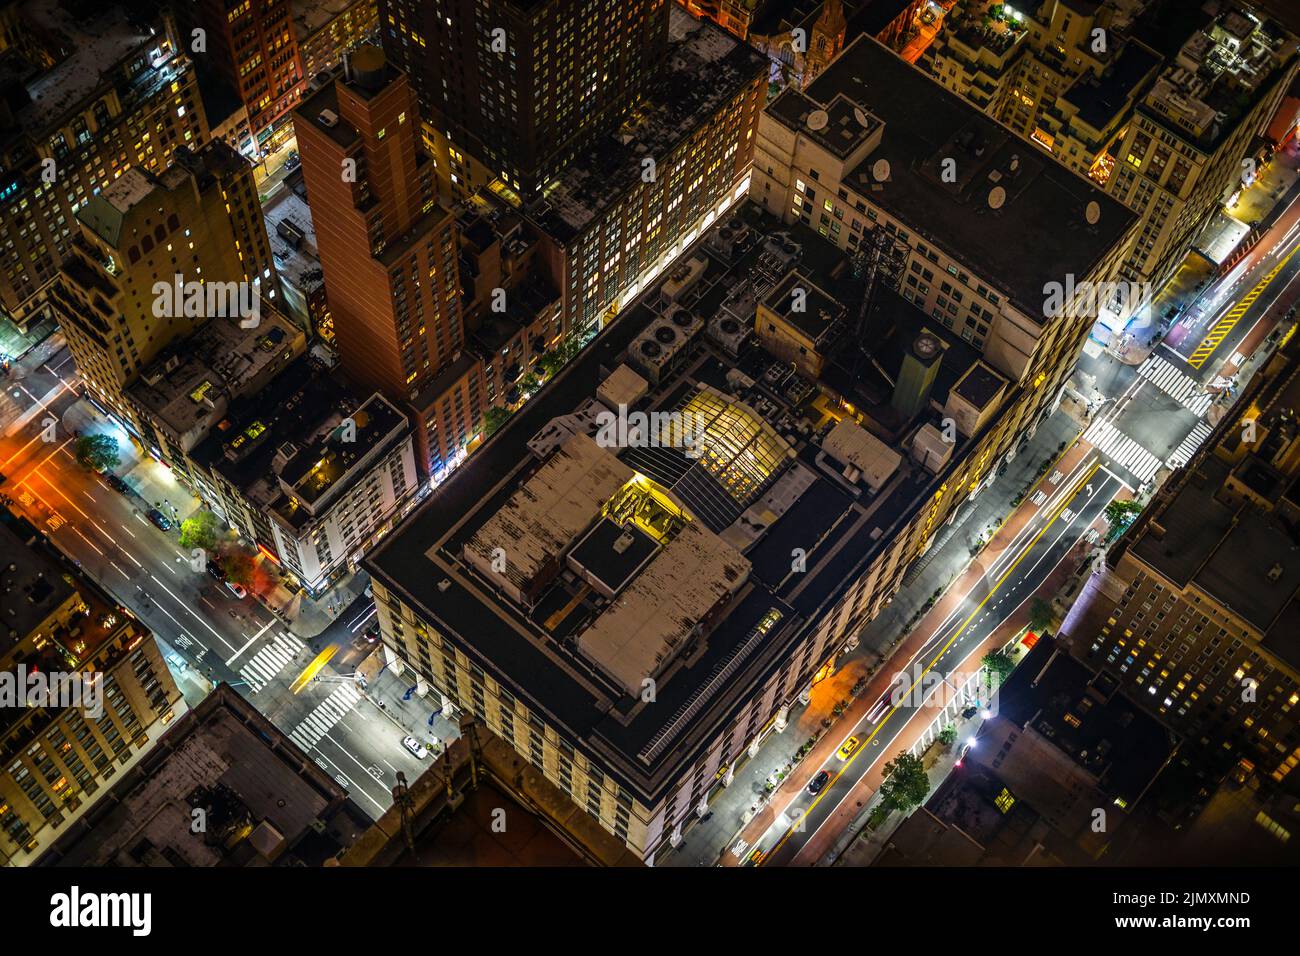 New York night view seen from the Empire State Building Stock Photo